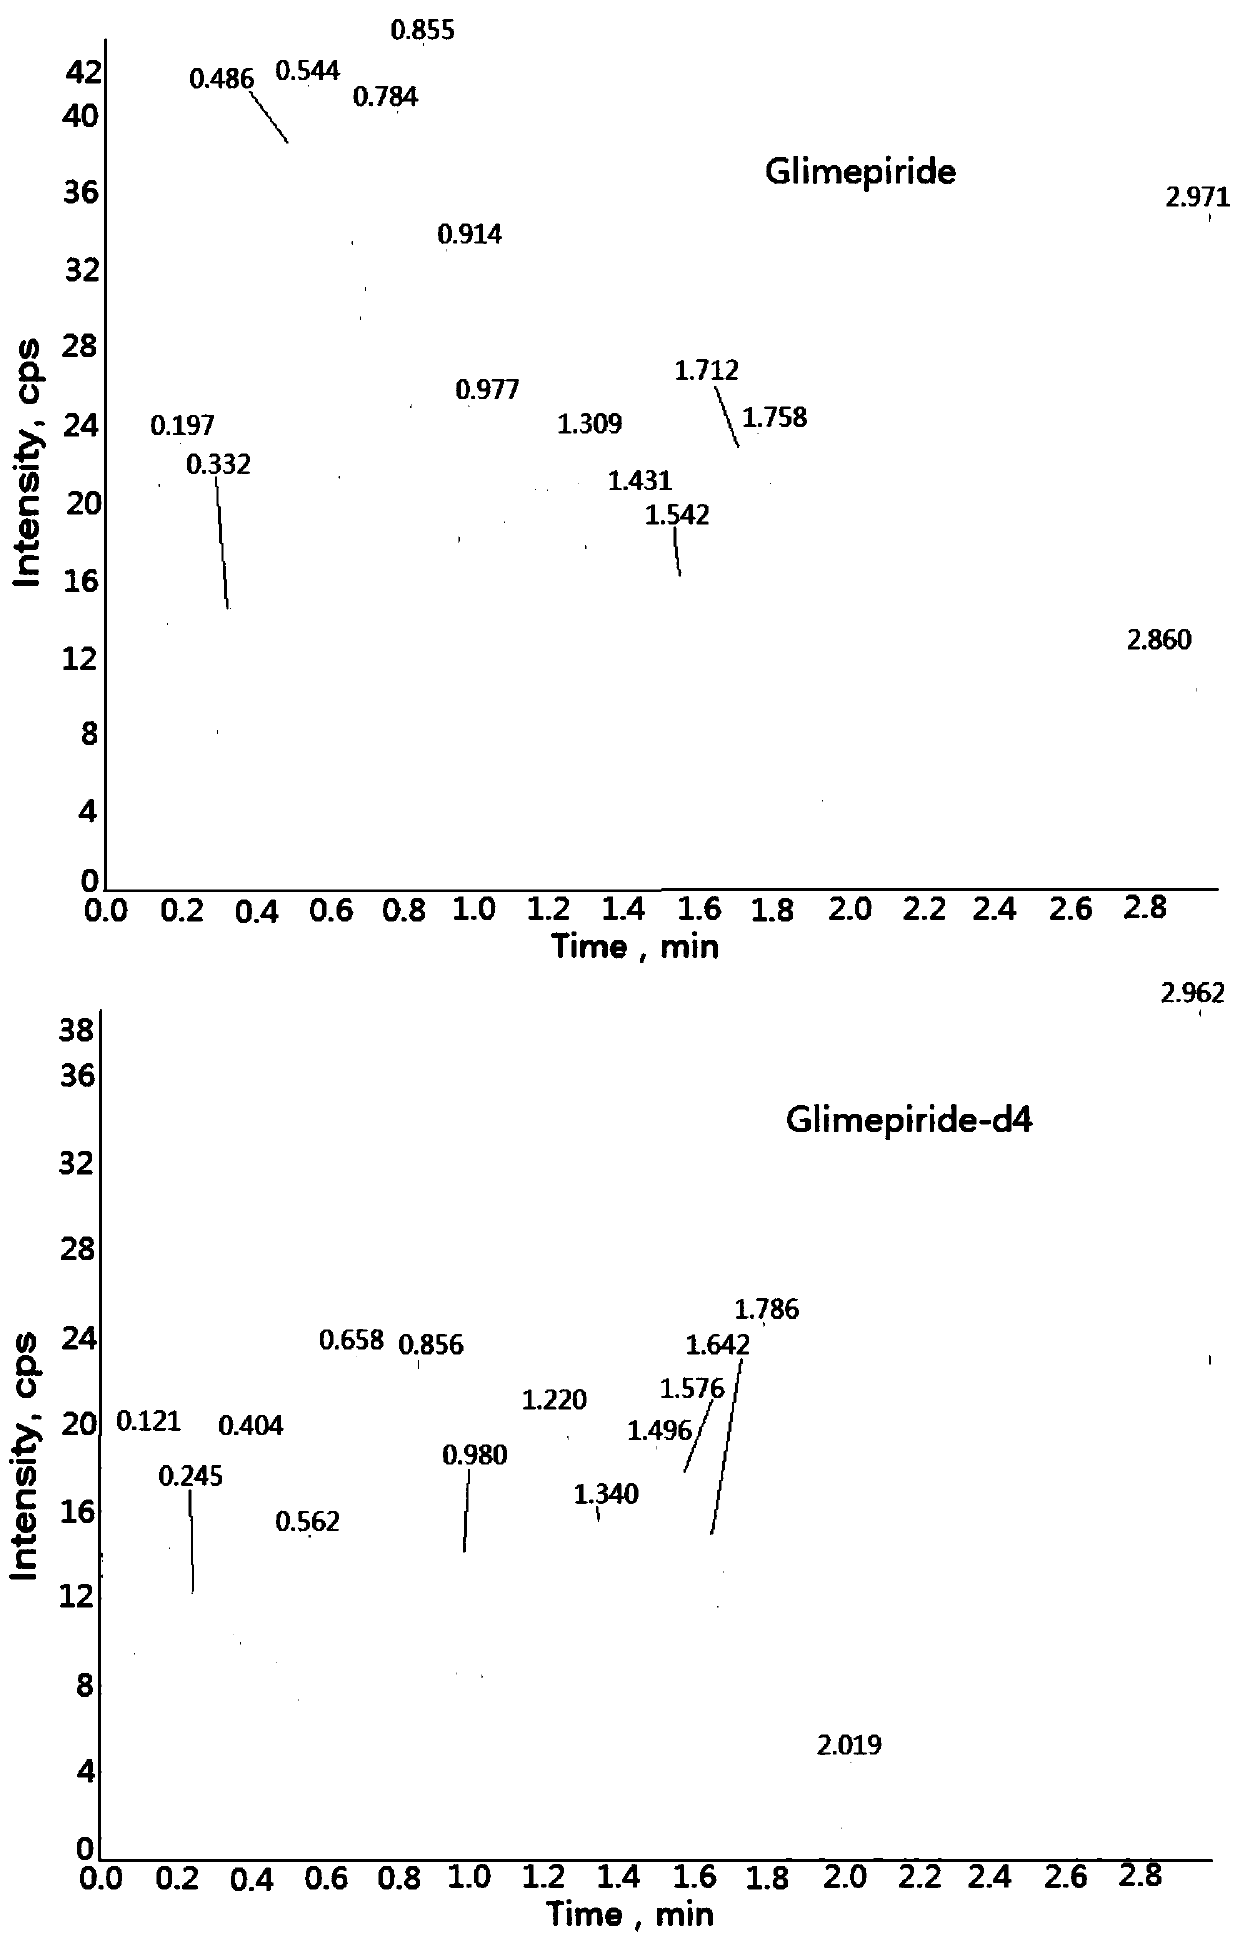 Method for determining concentration of glimepiride in blood plasma by liquid chromatography-mass spectrometry